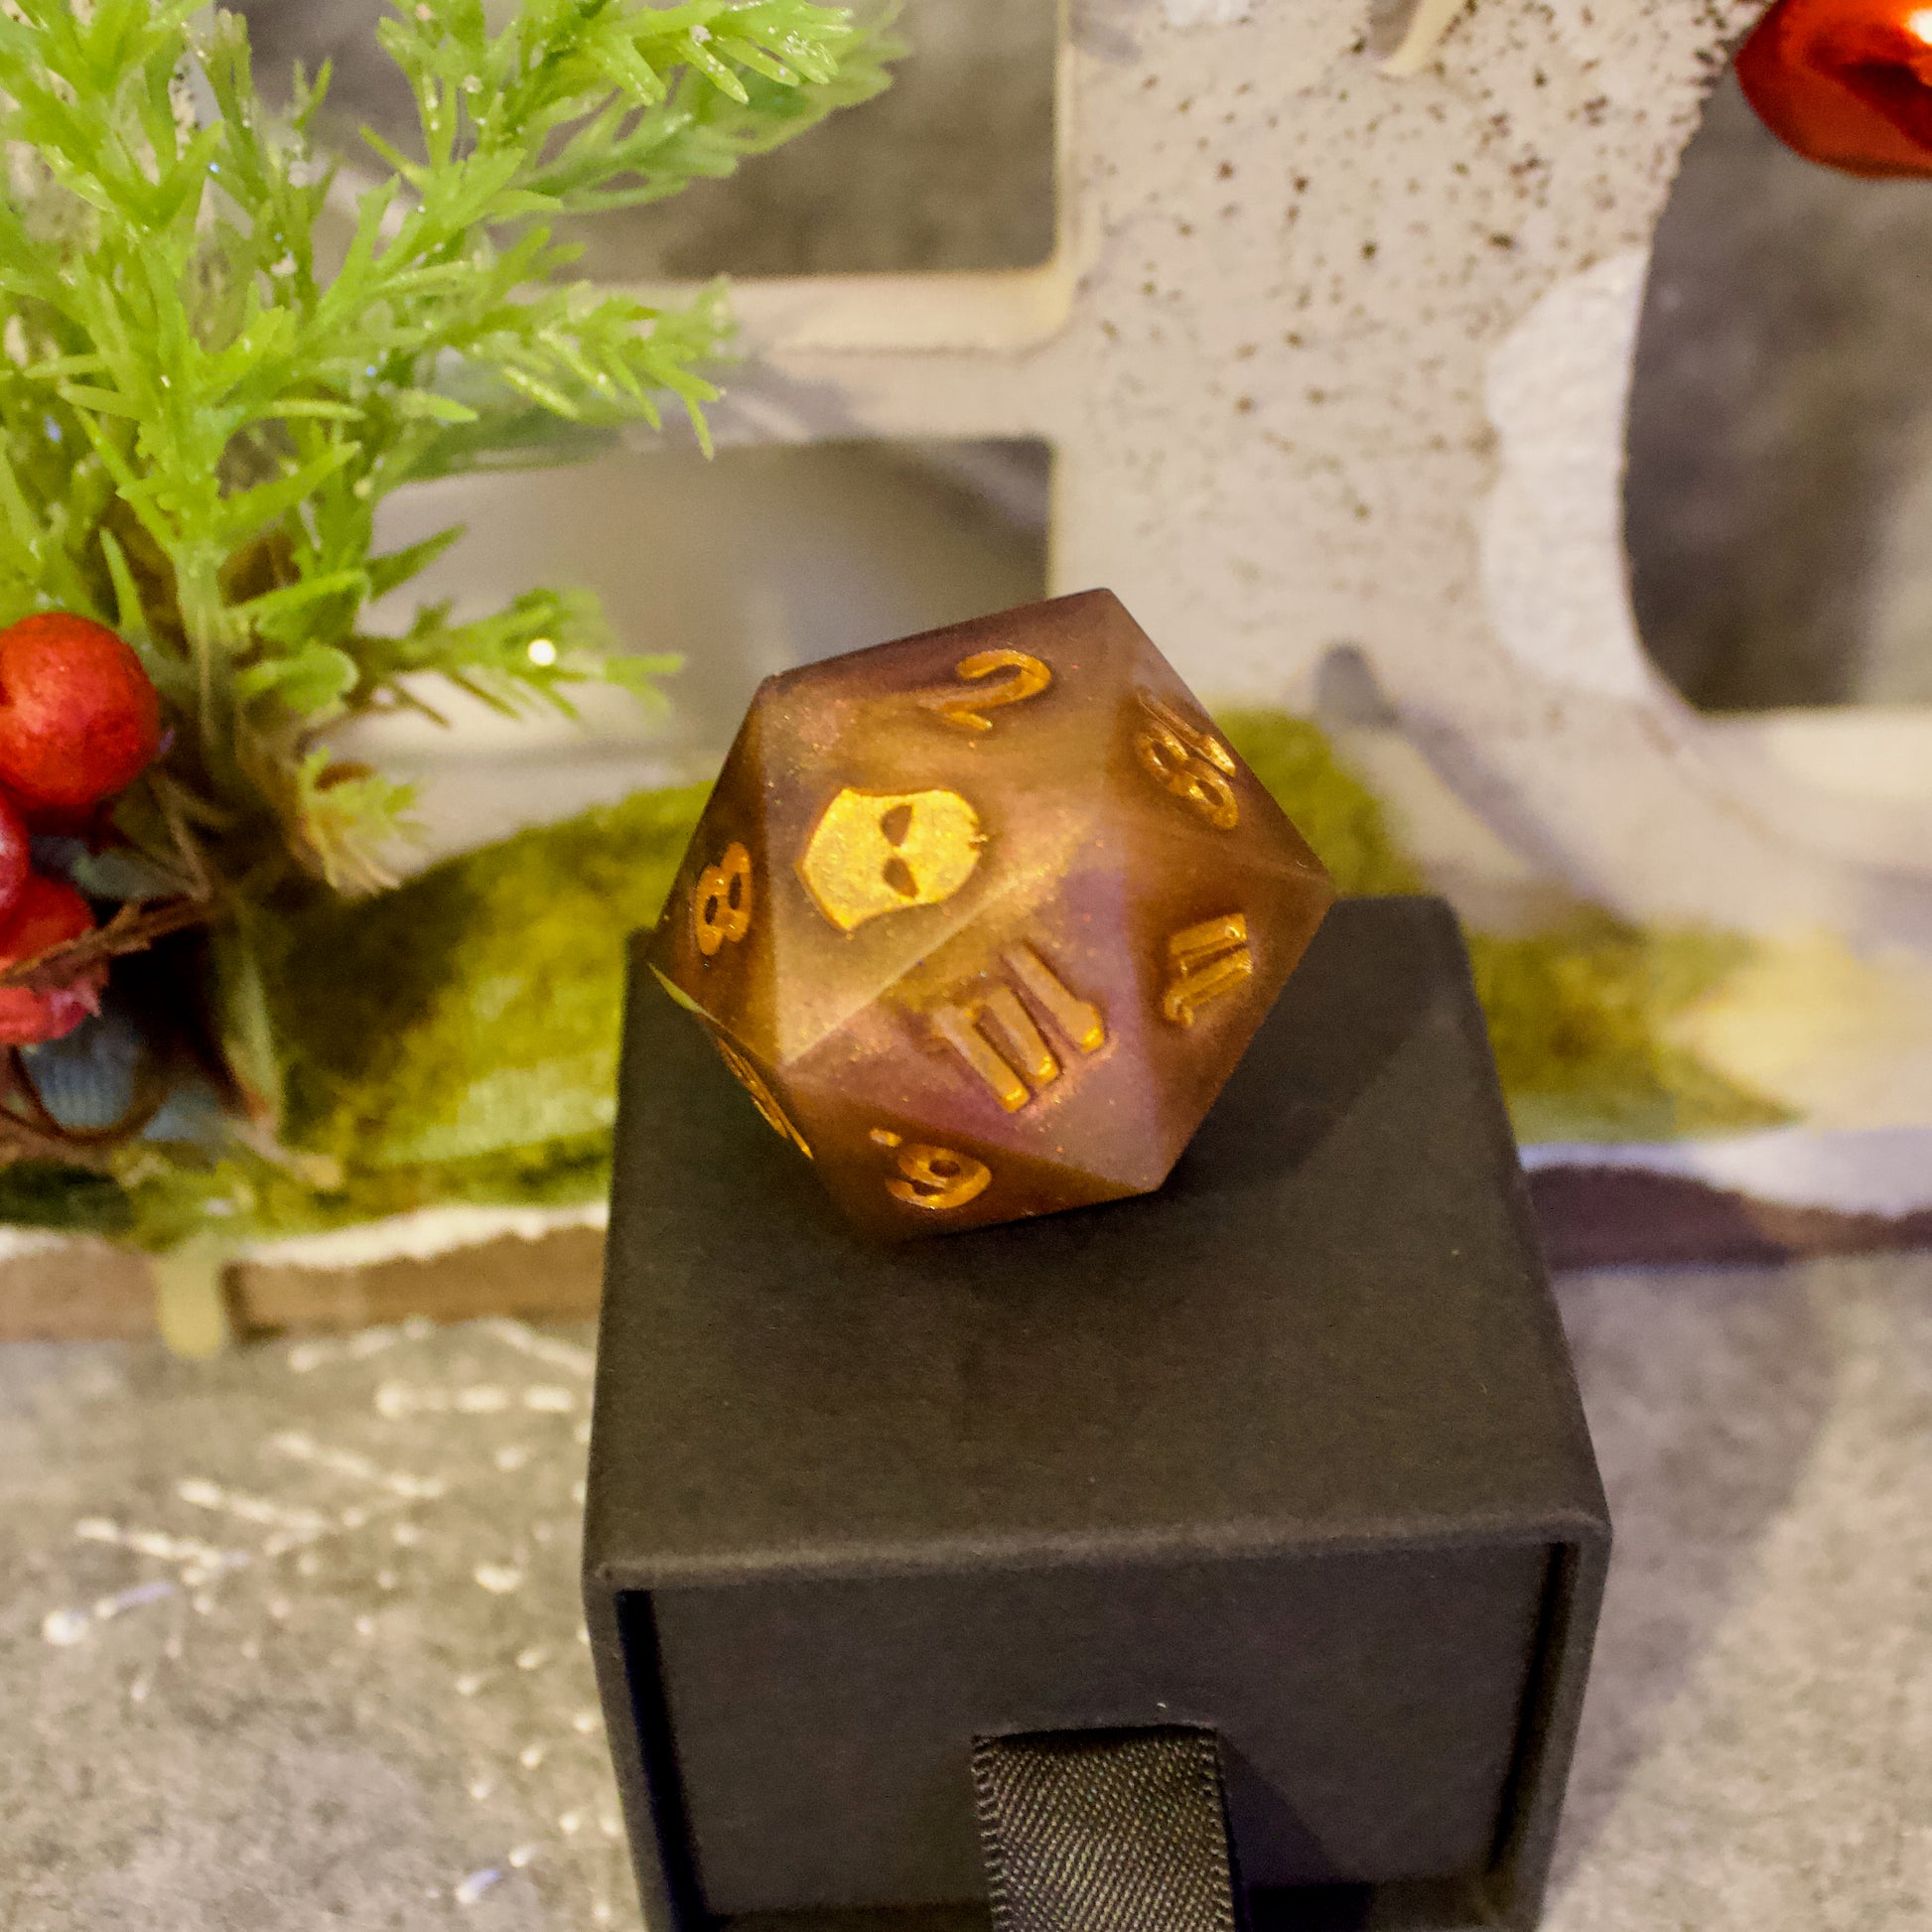 Handmade D20, handmade dnd dice sets, handmade RPG d20, rpg dice sets for critical critters and dice goblin collectors